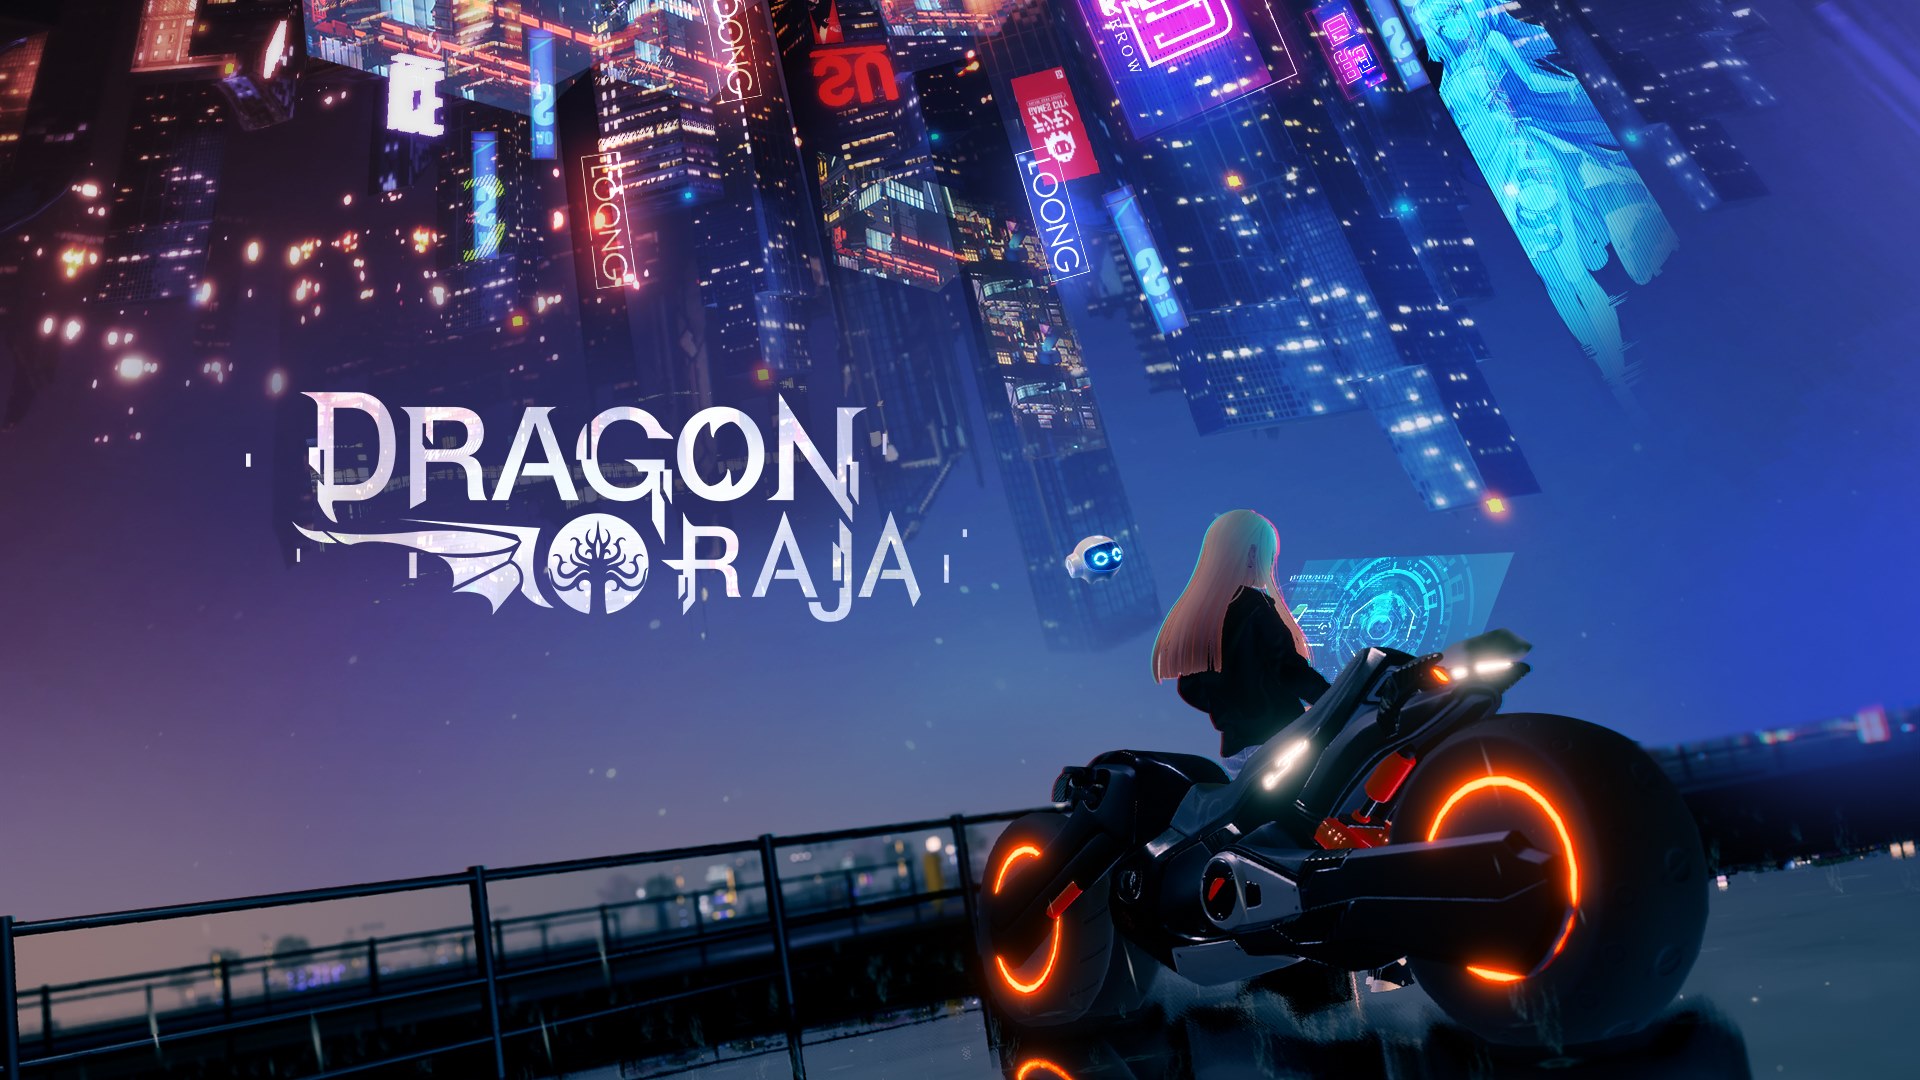 Dragon Raja HD Wallpapers and Backgrounds. 